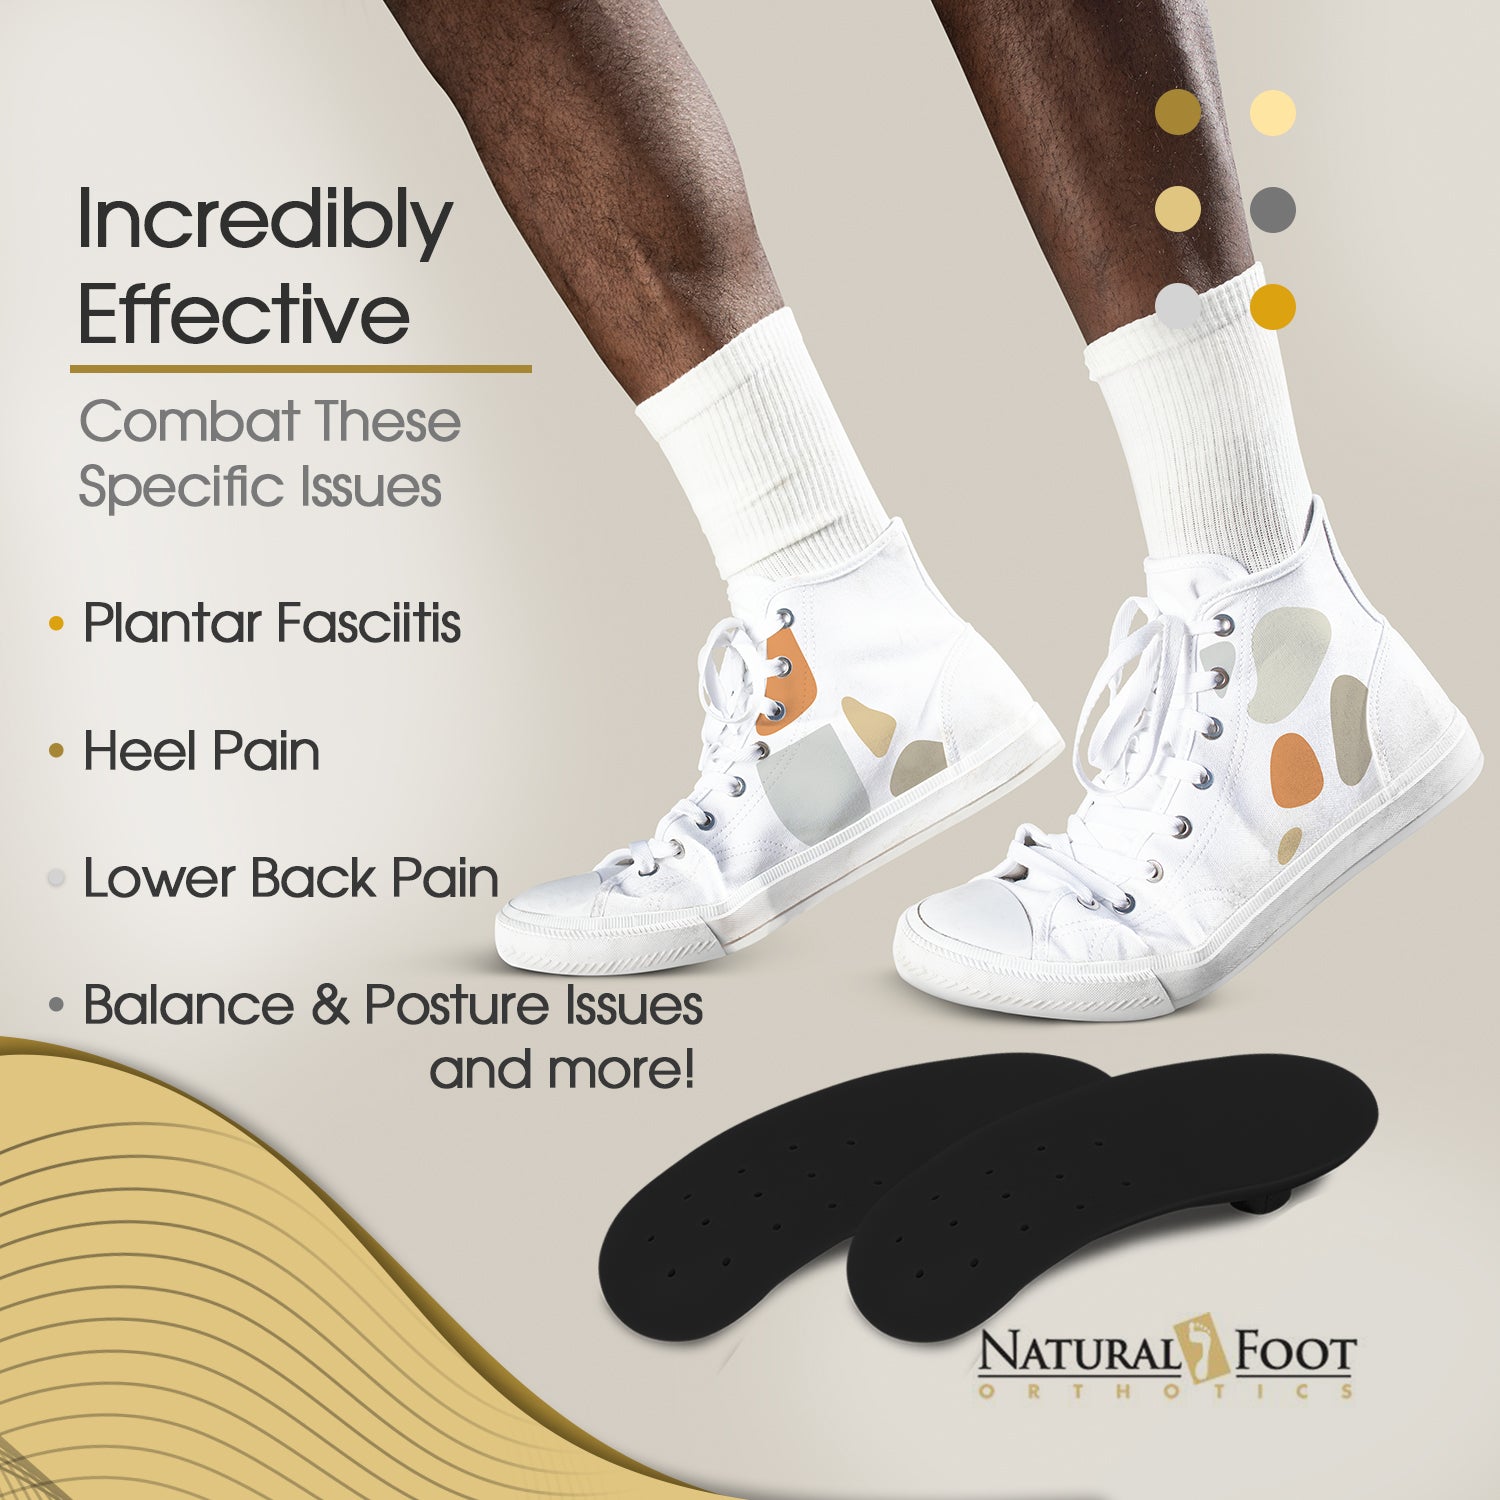 Slim Orthotic Stabilizer | Insoles Designed for Low to Flat Arches